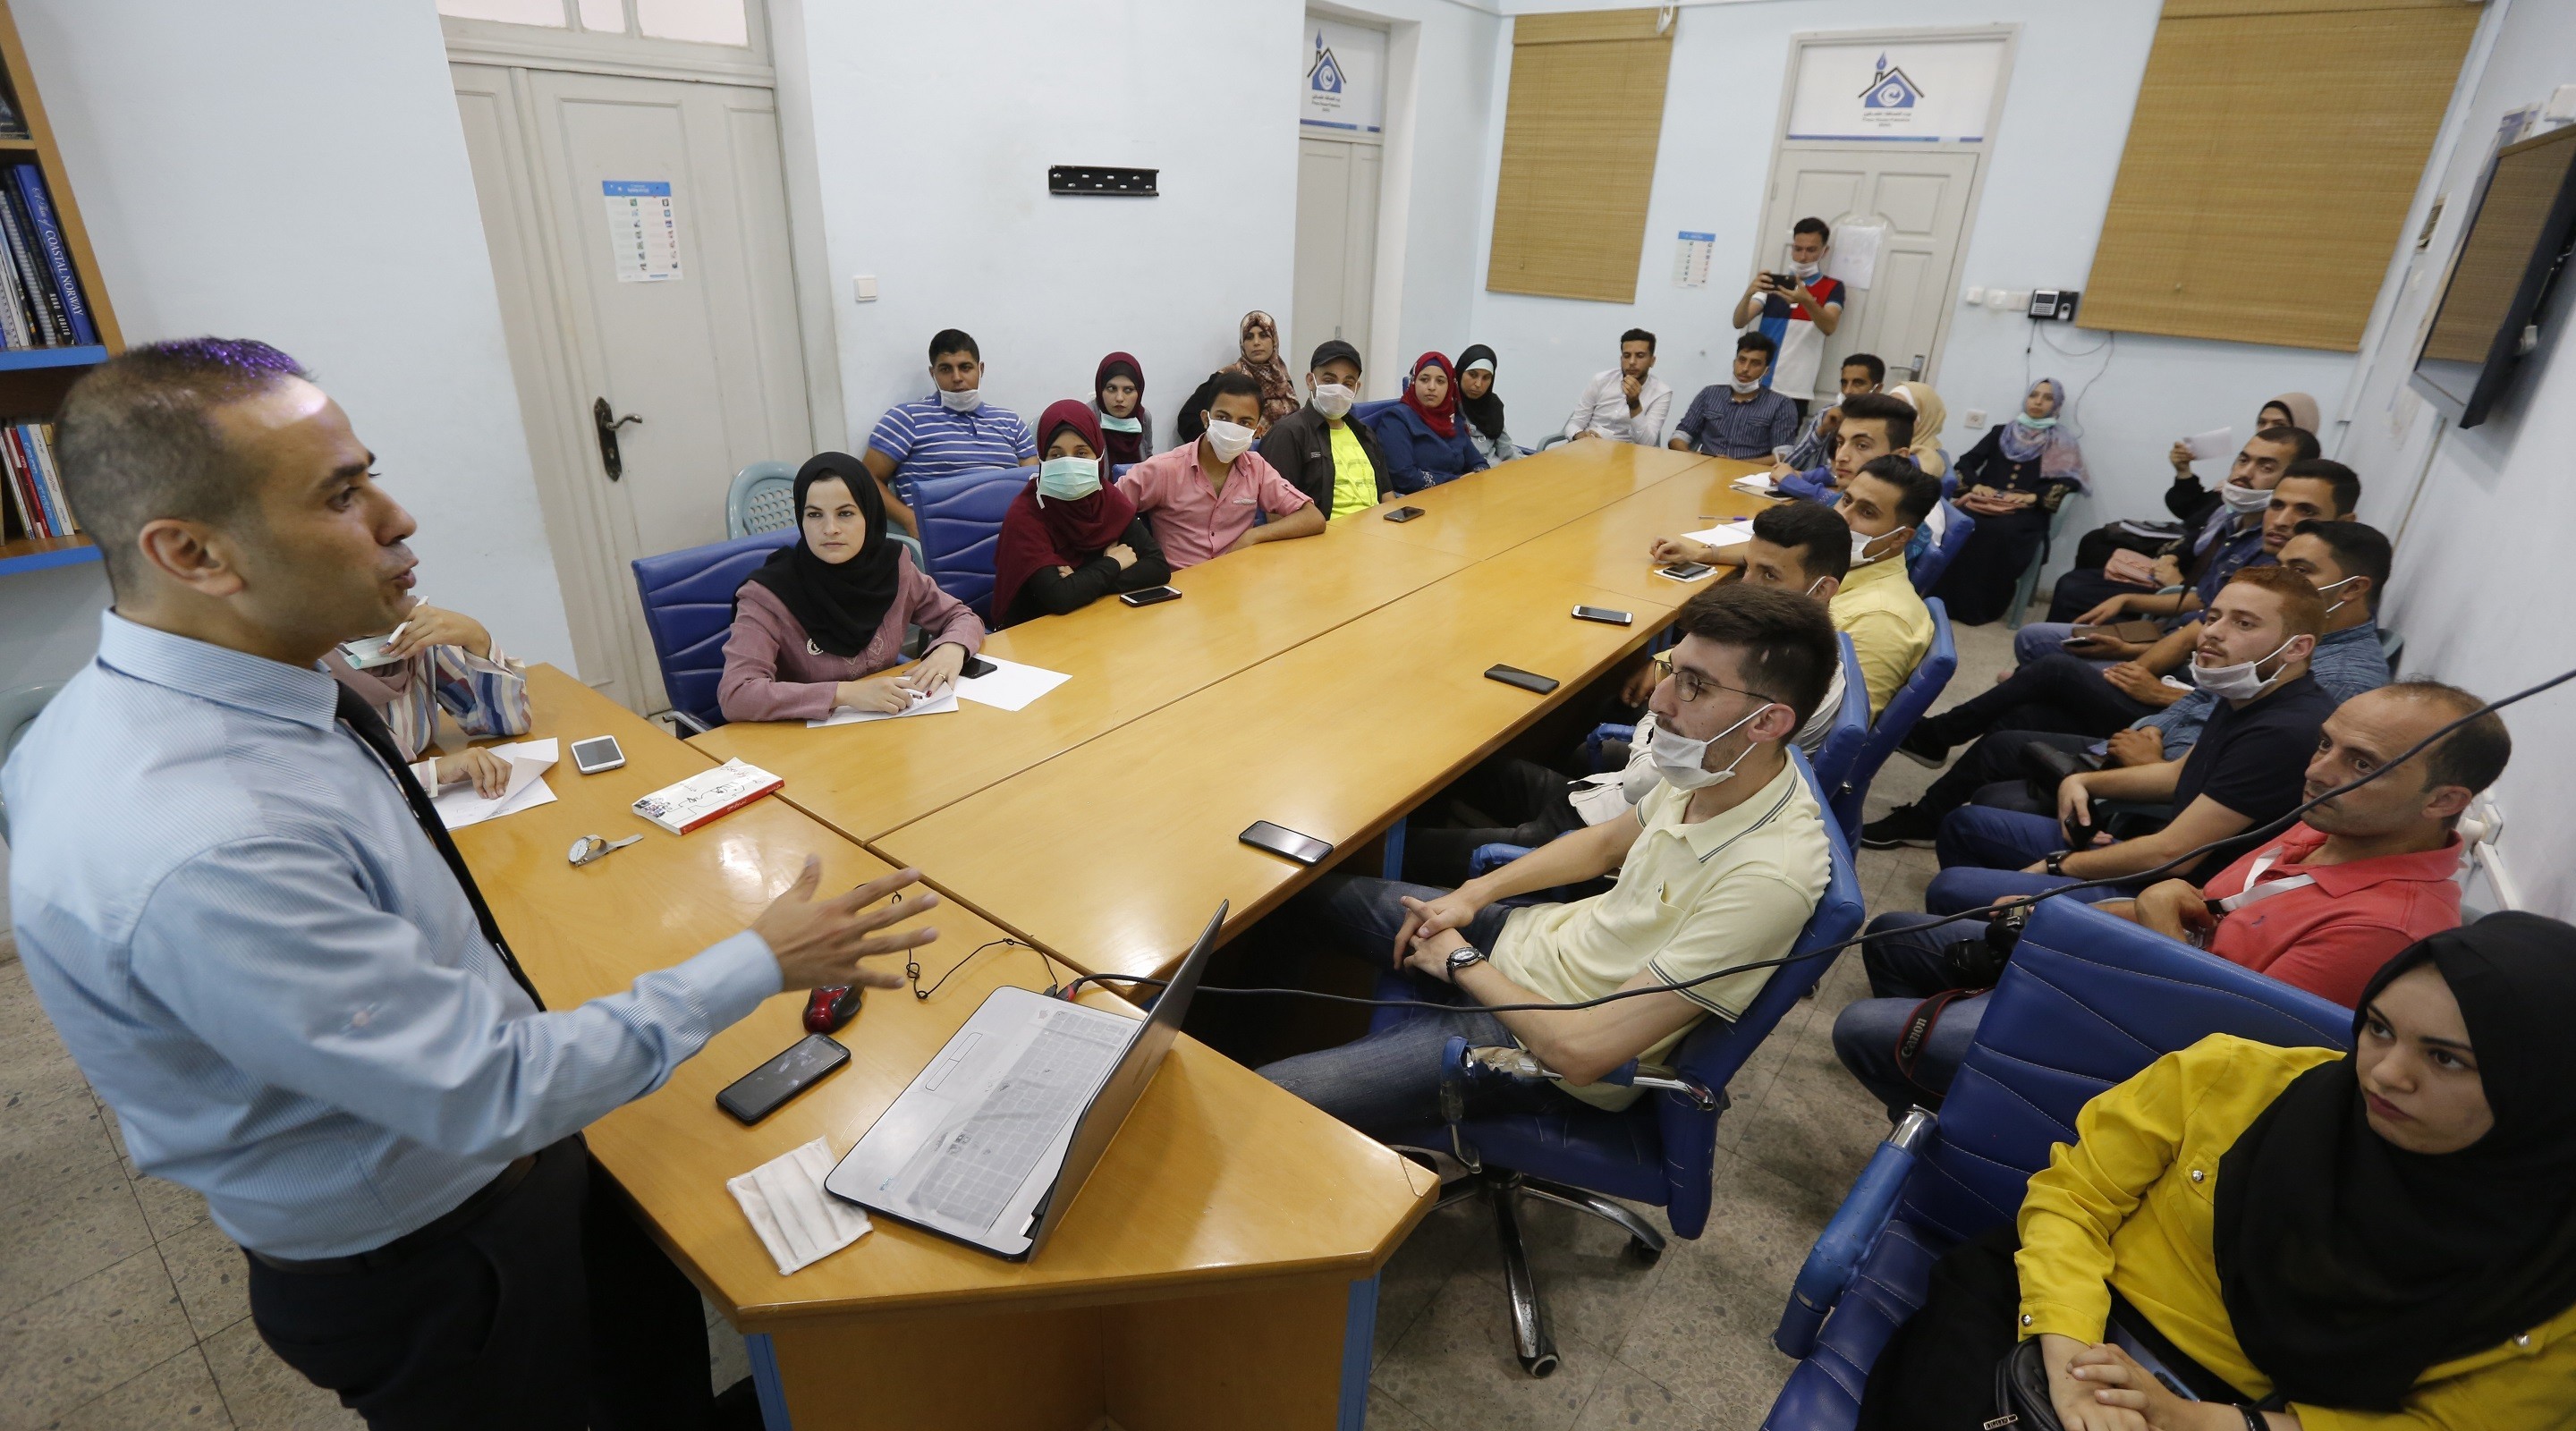  Press House organizes a workshop in cooperation with the Palestinian Ministry of Health in Gaza